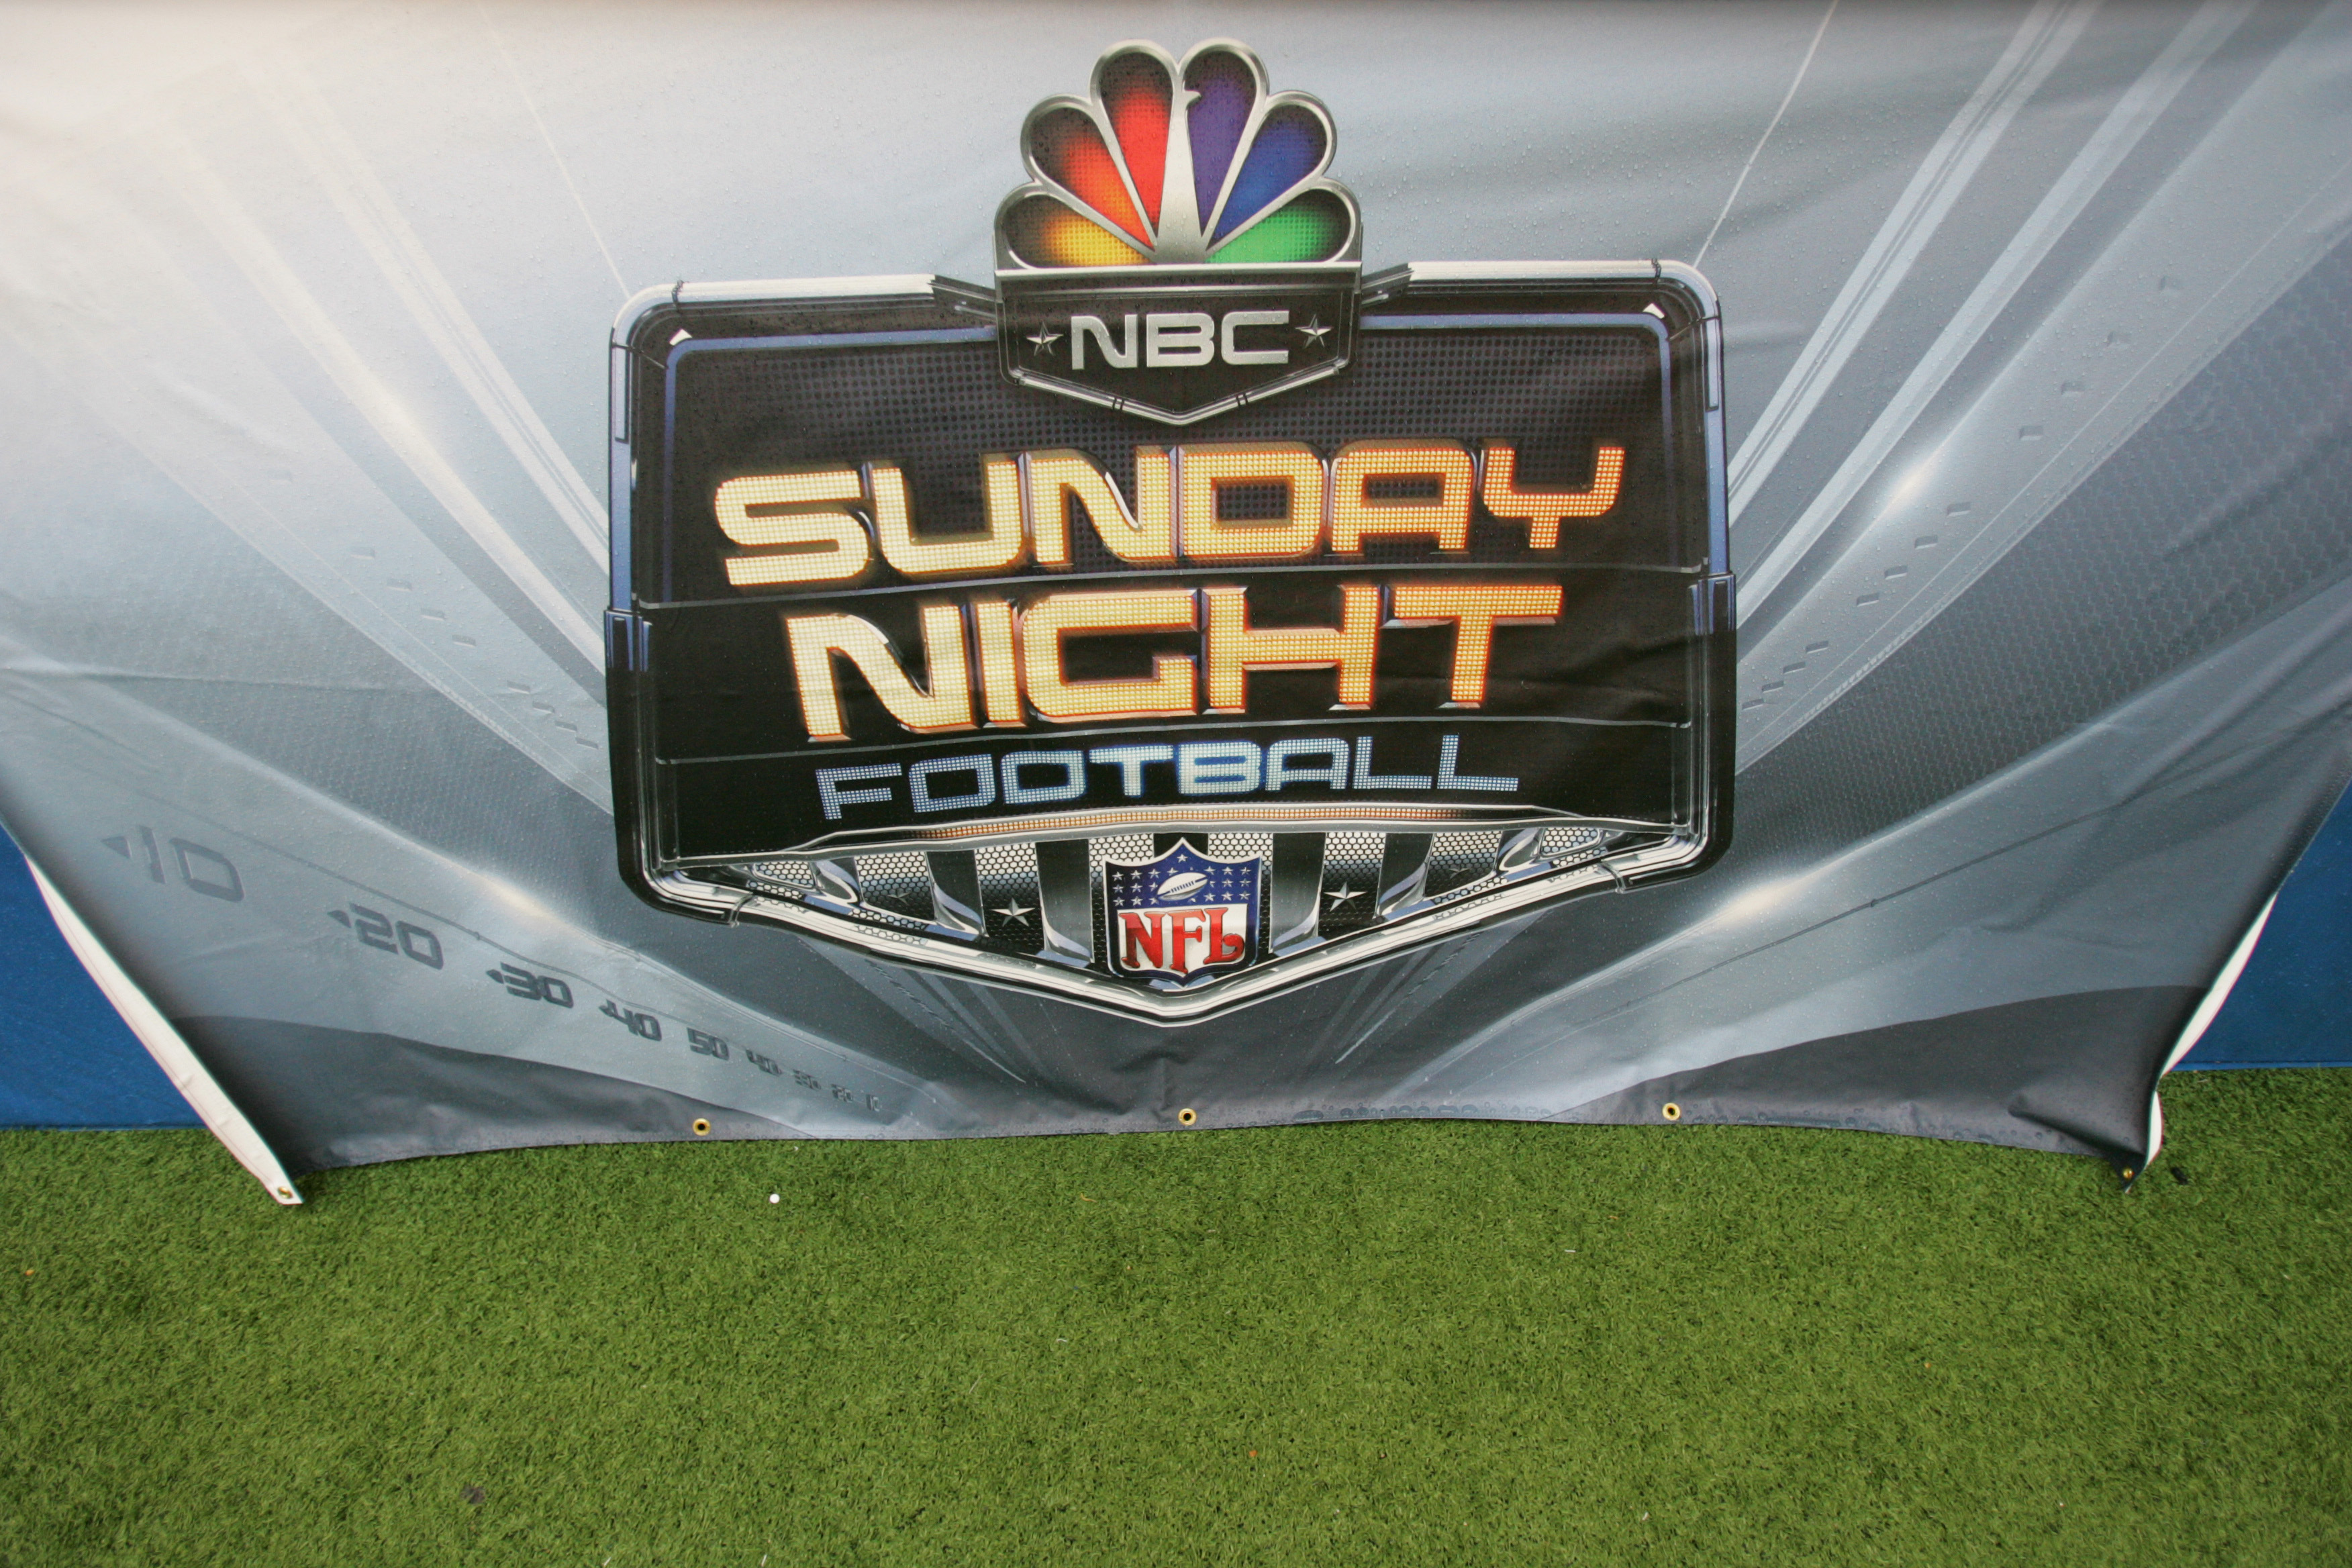 Sunday Night Football 2022 Opener Featuring Carrie Underwood NBC Television  NFL Network 